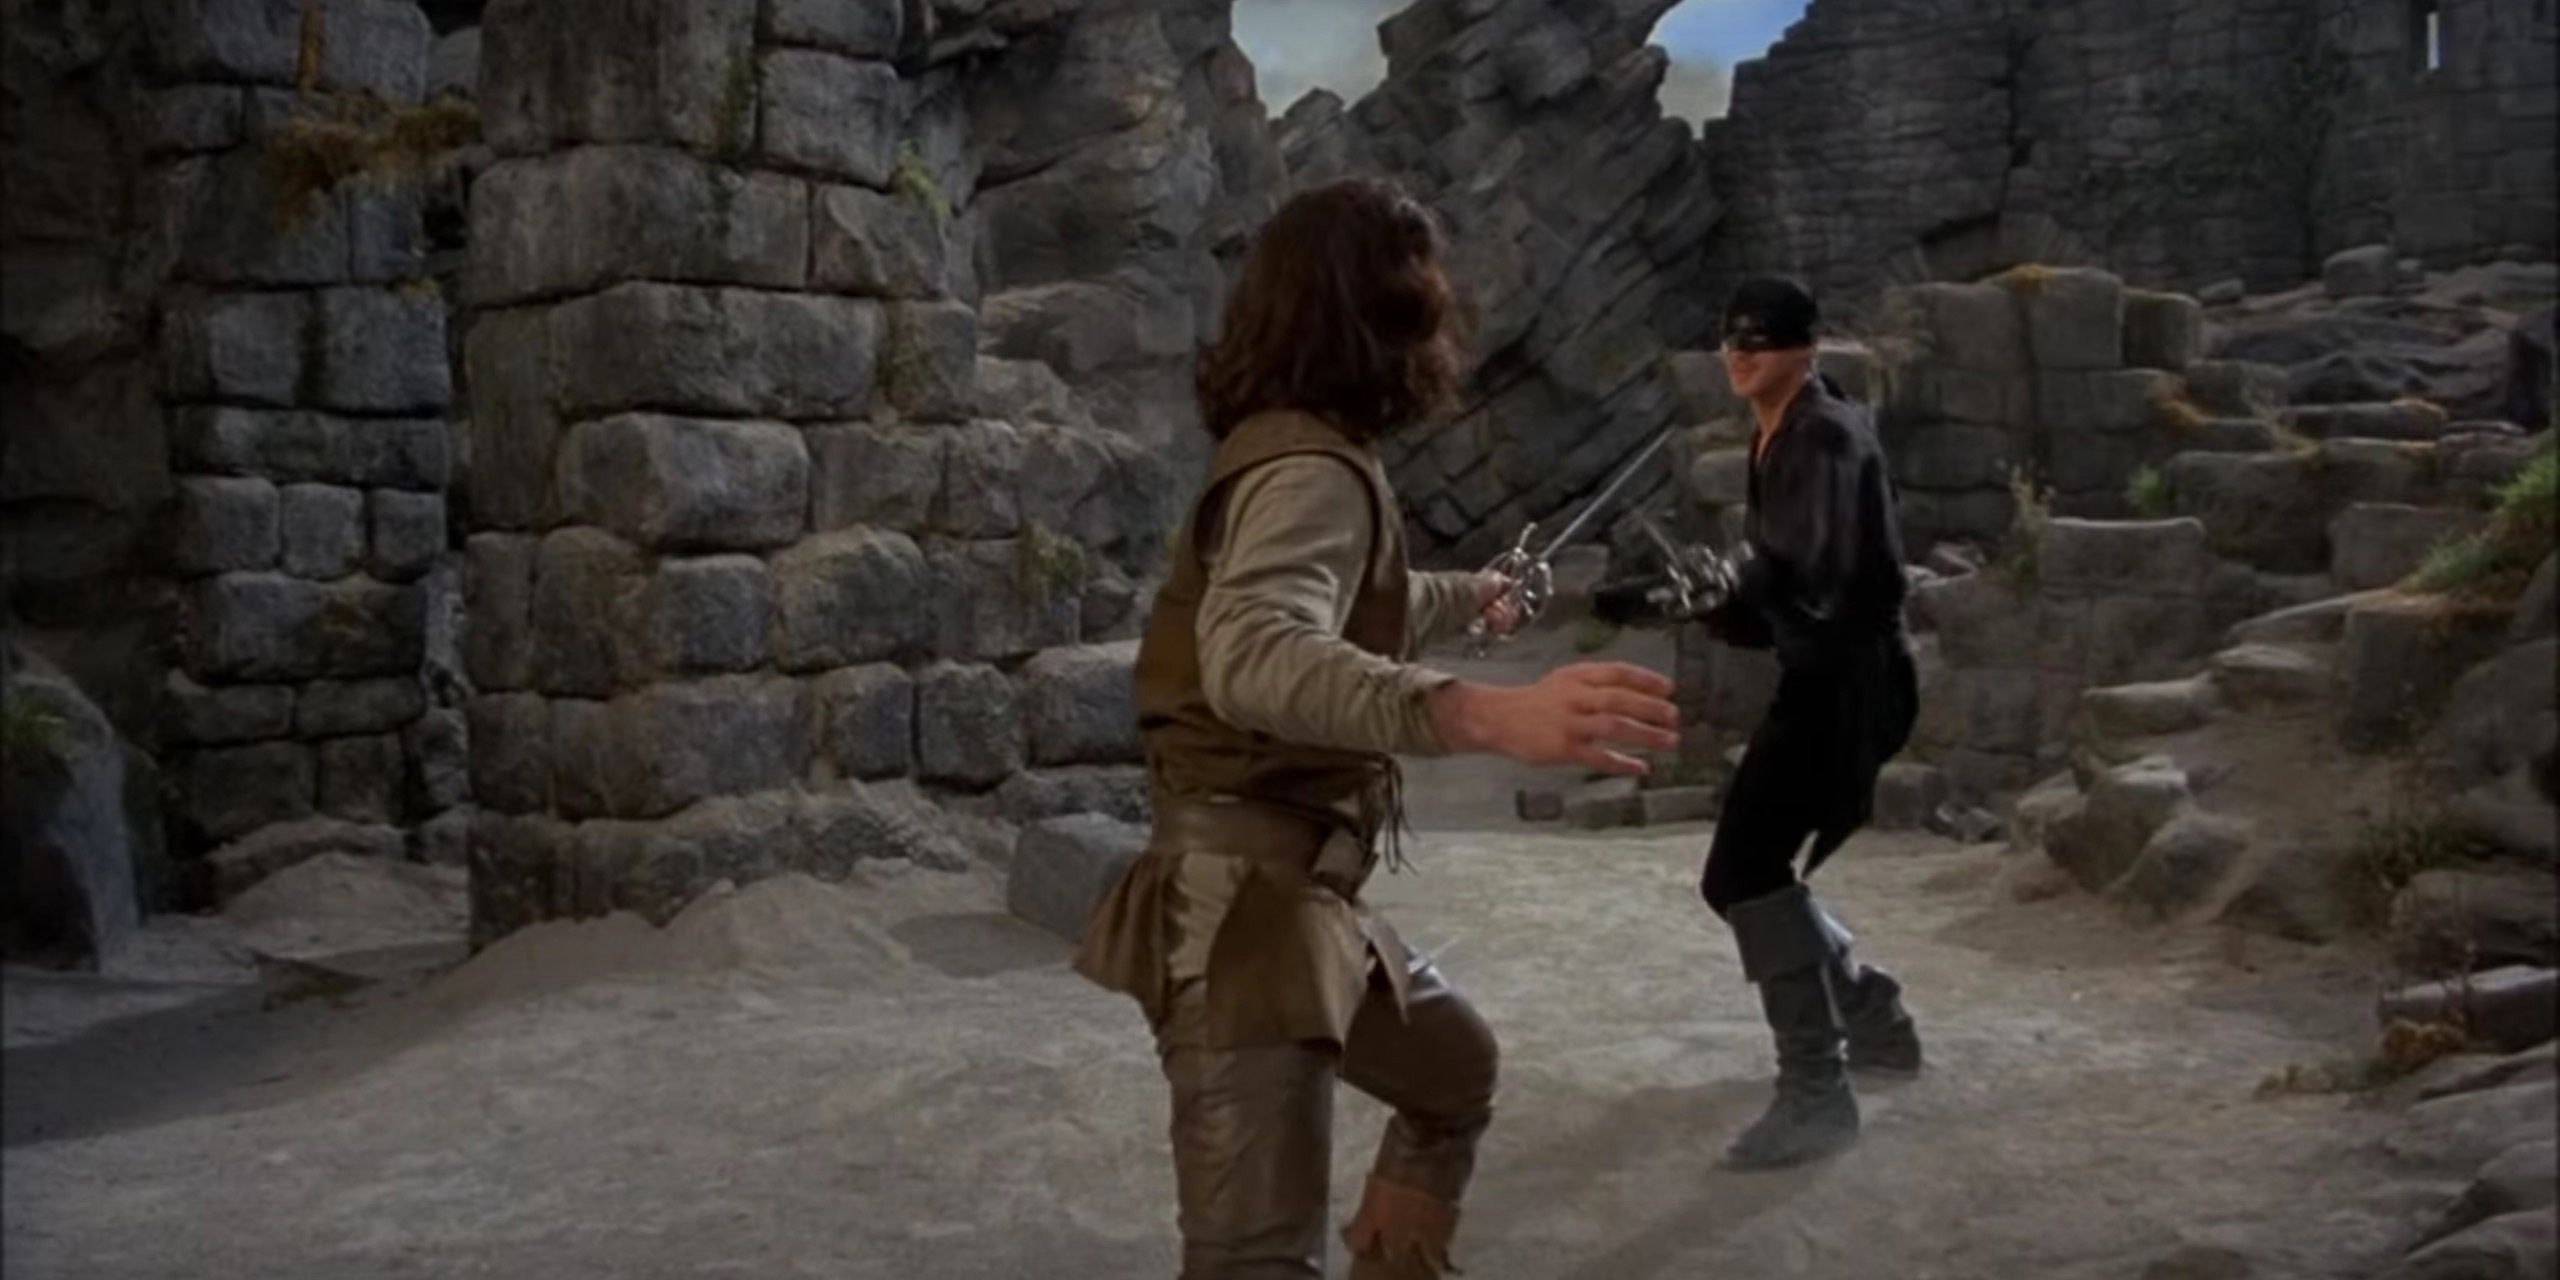 Cary Elwes and Mandy Patinkin swordfightin in The Princess Bride